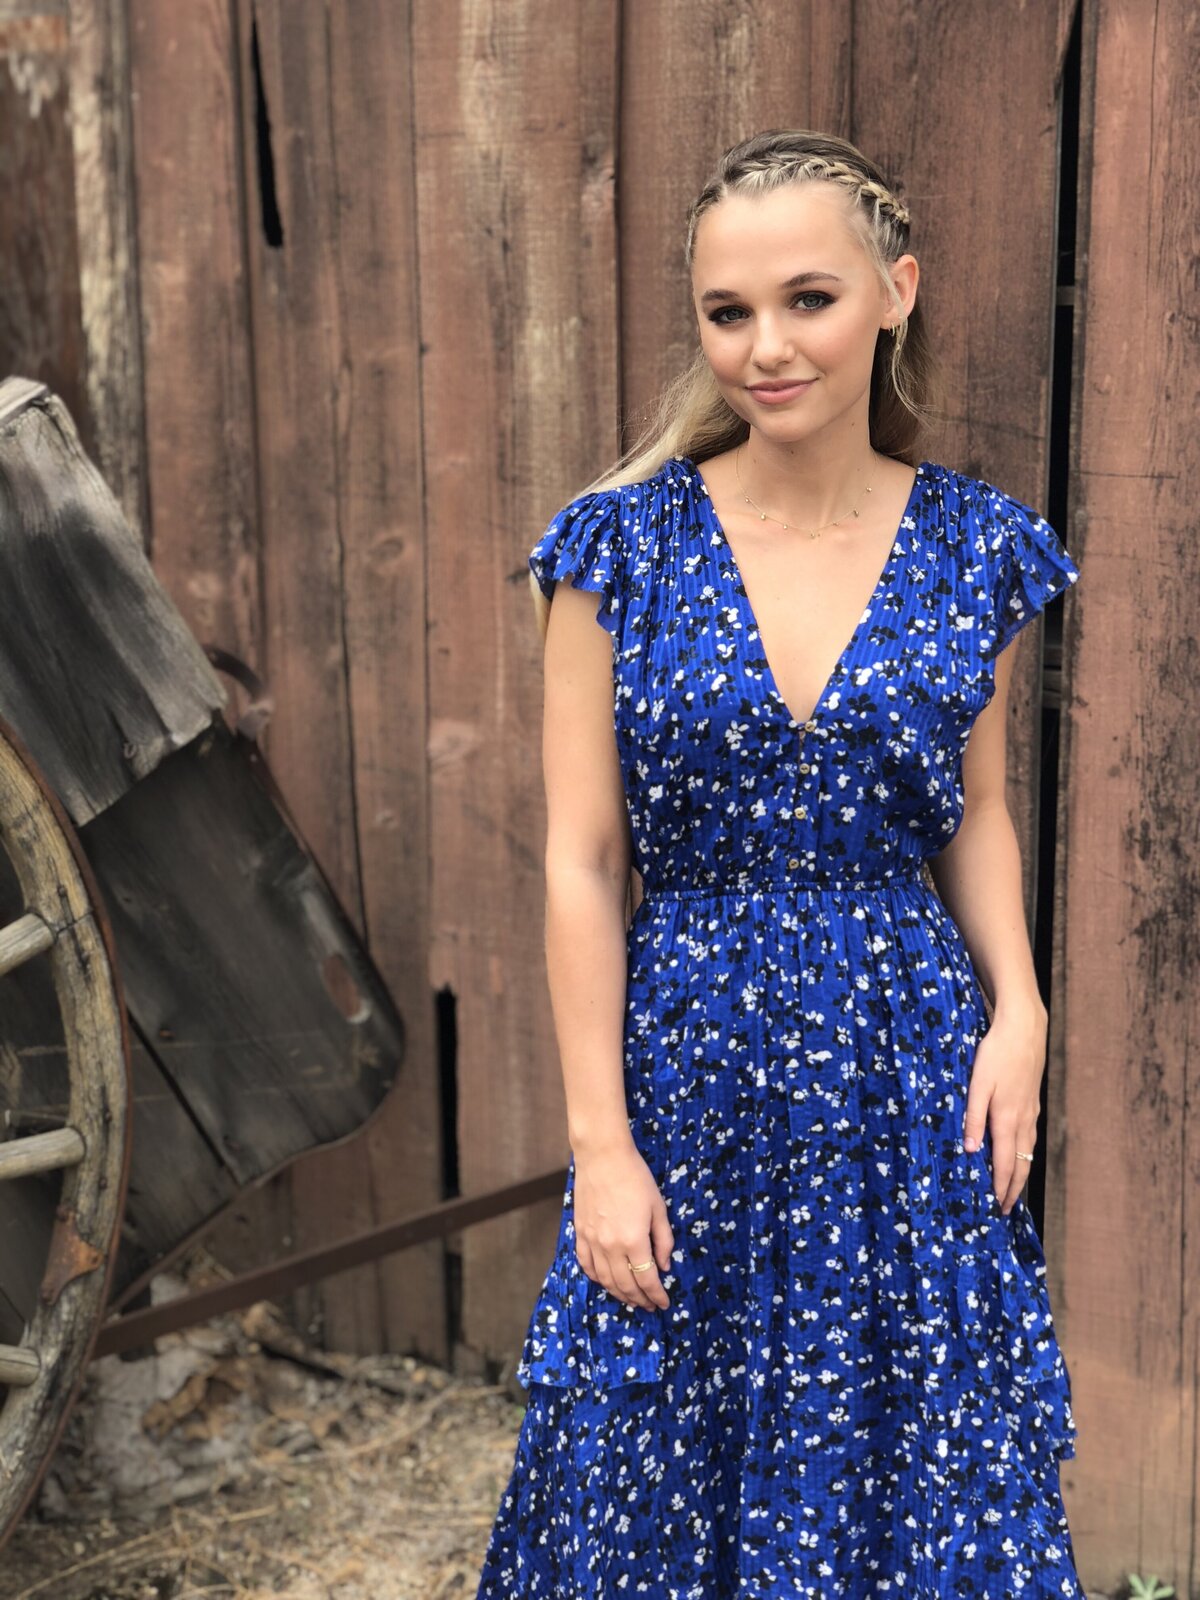 Madison Iseman in a blue dress and braided hair